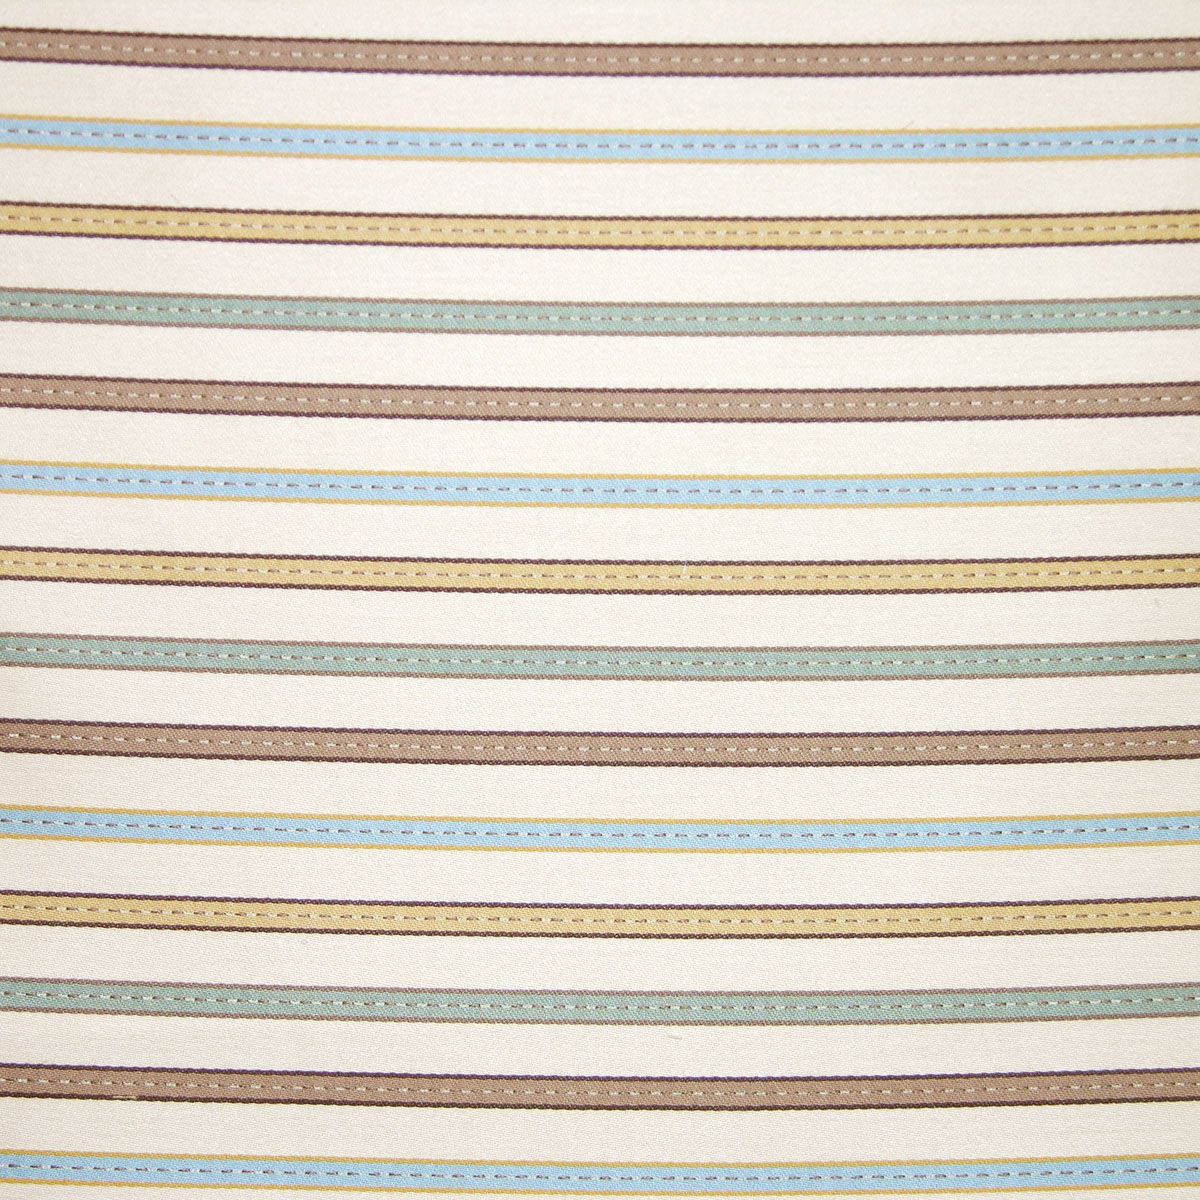 Catamaran fabric in surf color - pattern number SU 0002P831 - by Scalamandre in the Old World Weavers collection